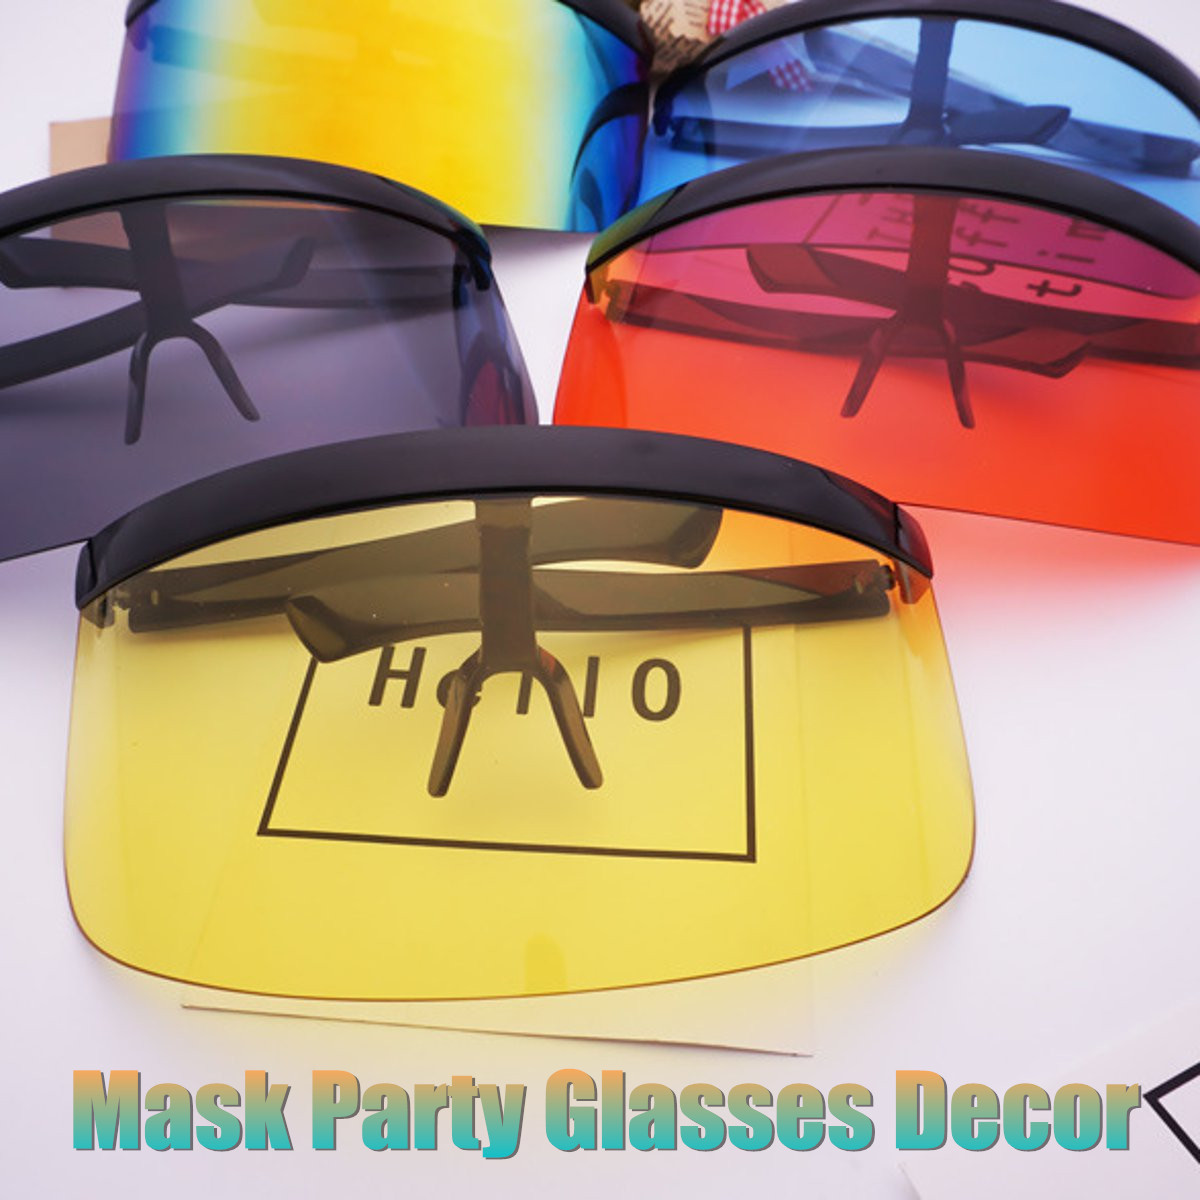 Polarized-Lens-Mask-Sun-Glasses-Futuristic-Costume-Party-Eyes-Mirrored-Frame-5-Color-1425321-1